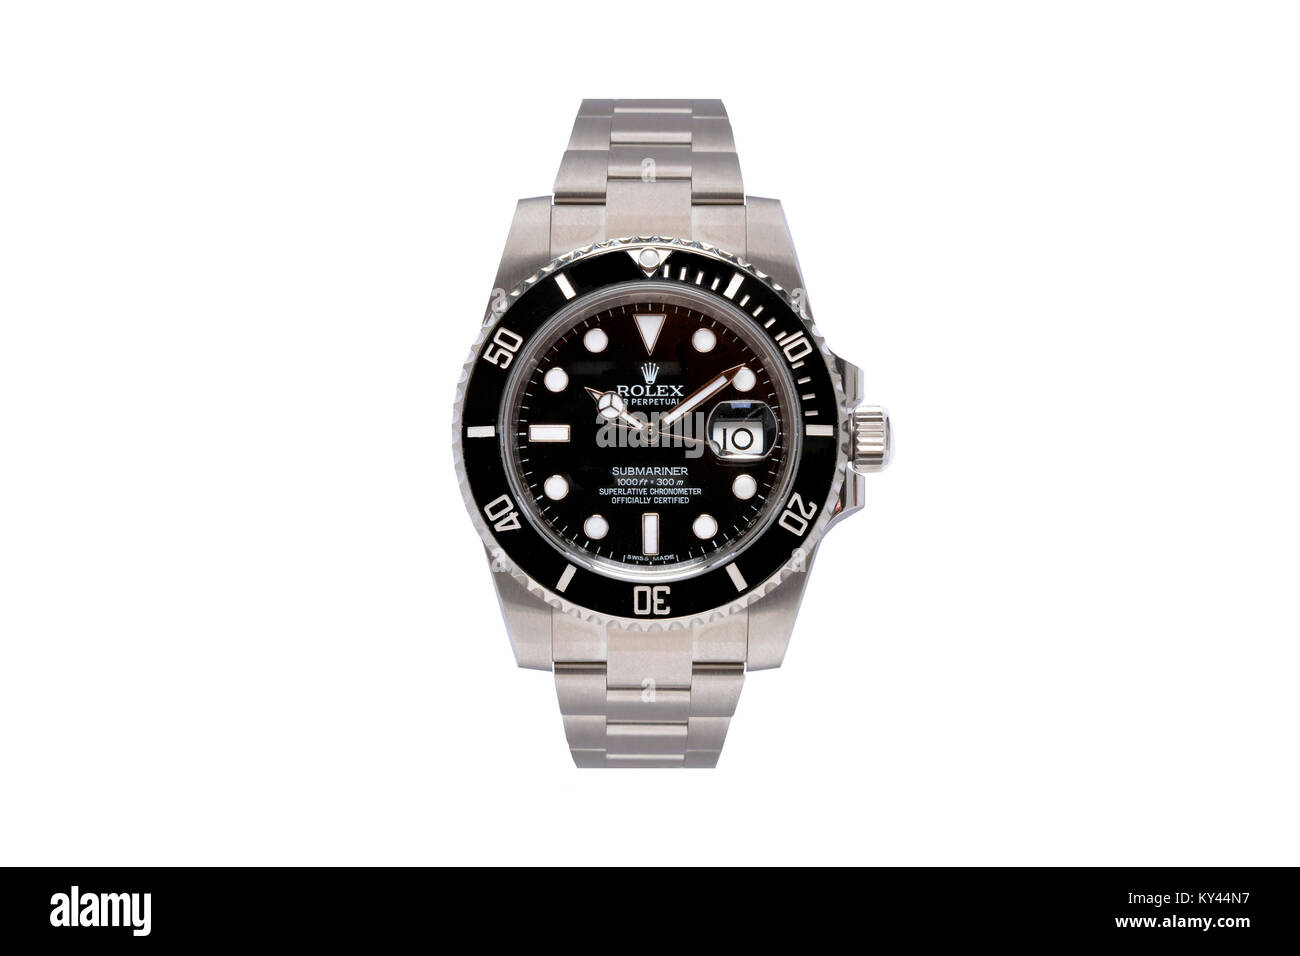 Rolex Submariner stainless steel man's watch with black face Stock Photo